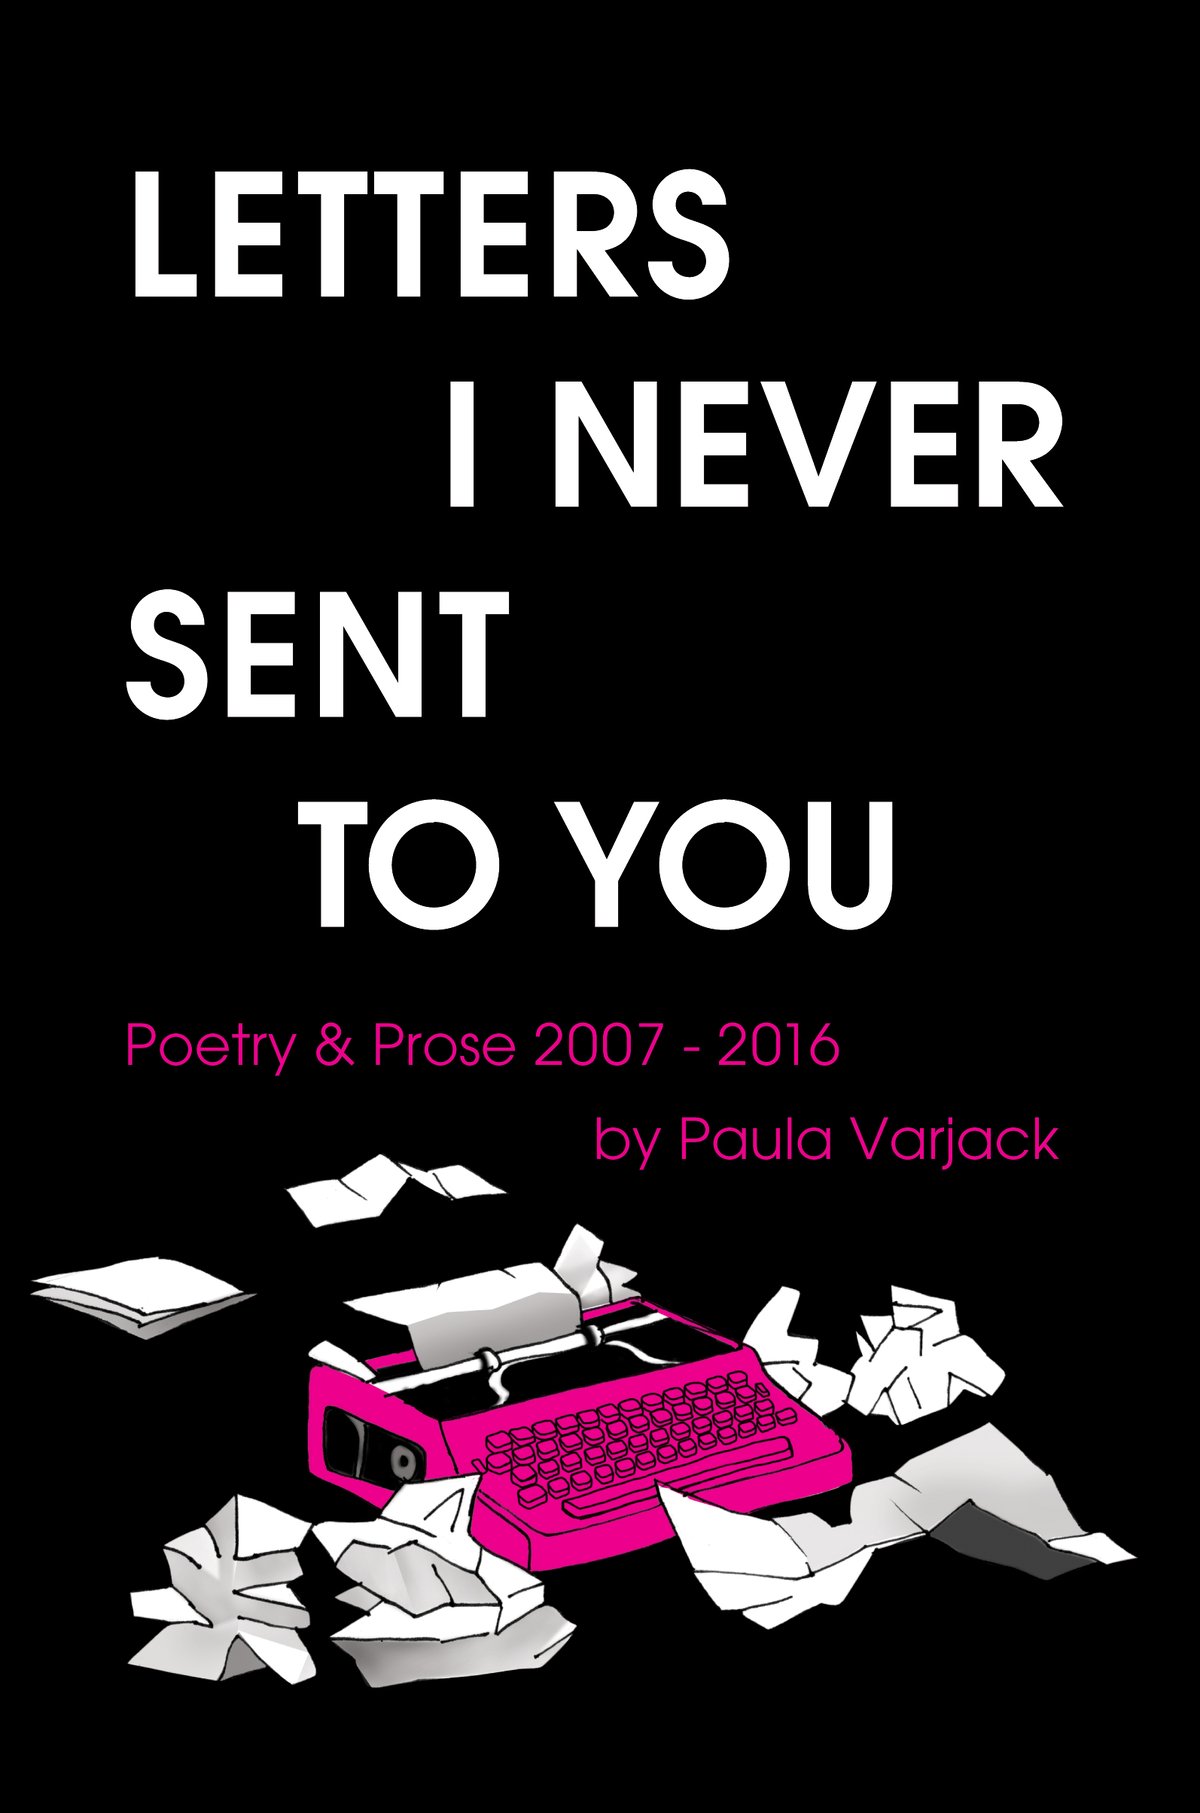 Image of The Letters I Never Sent You by Paula Varjack